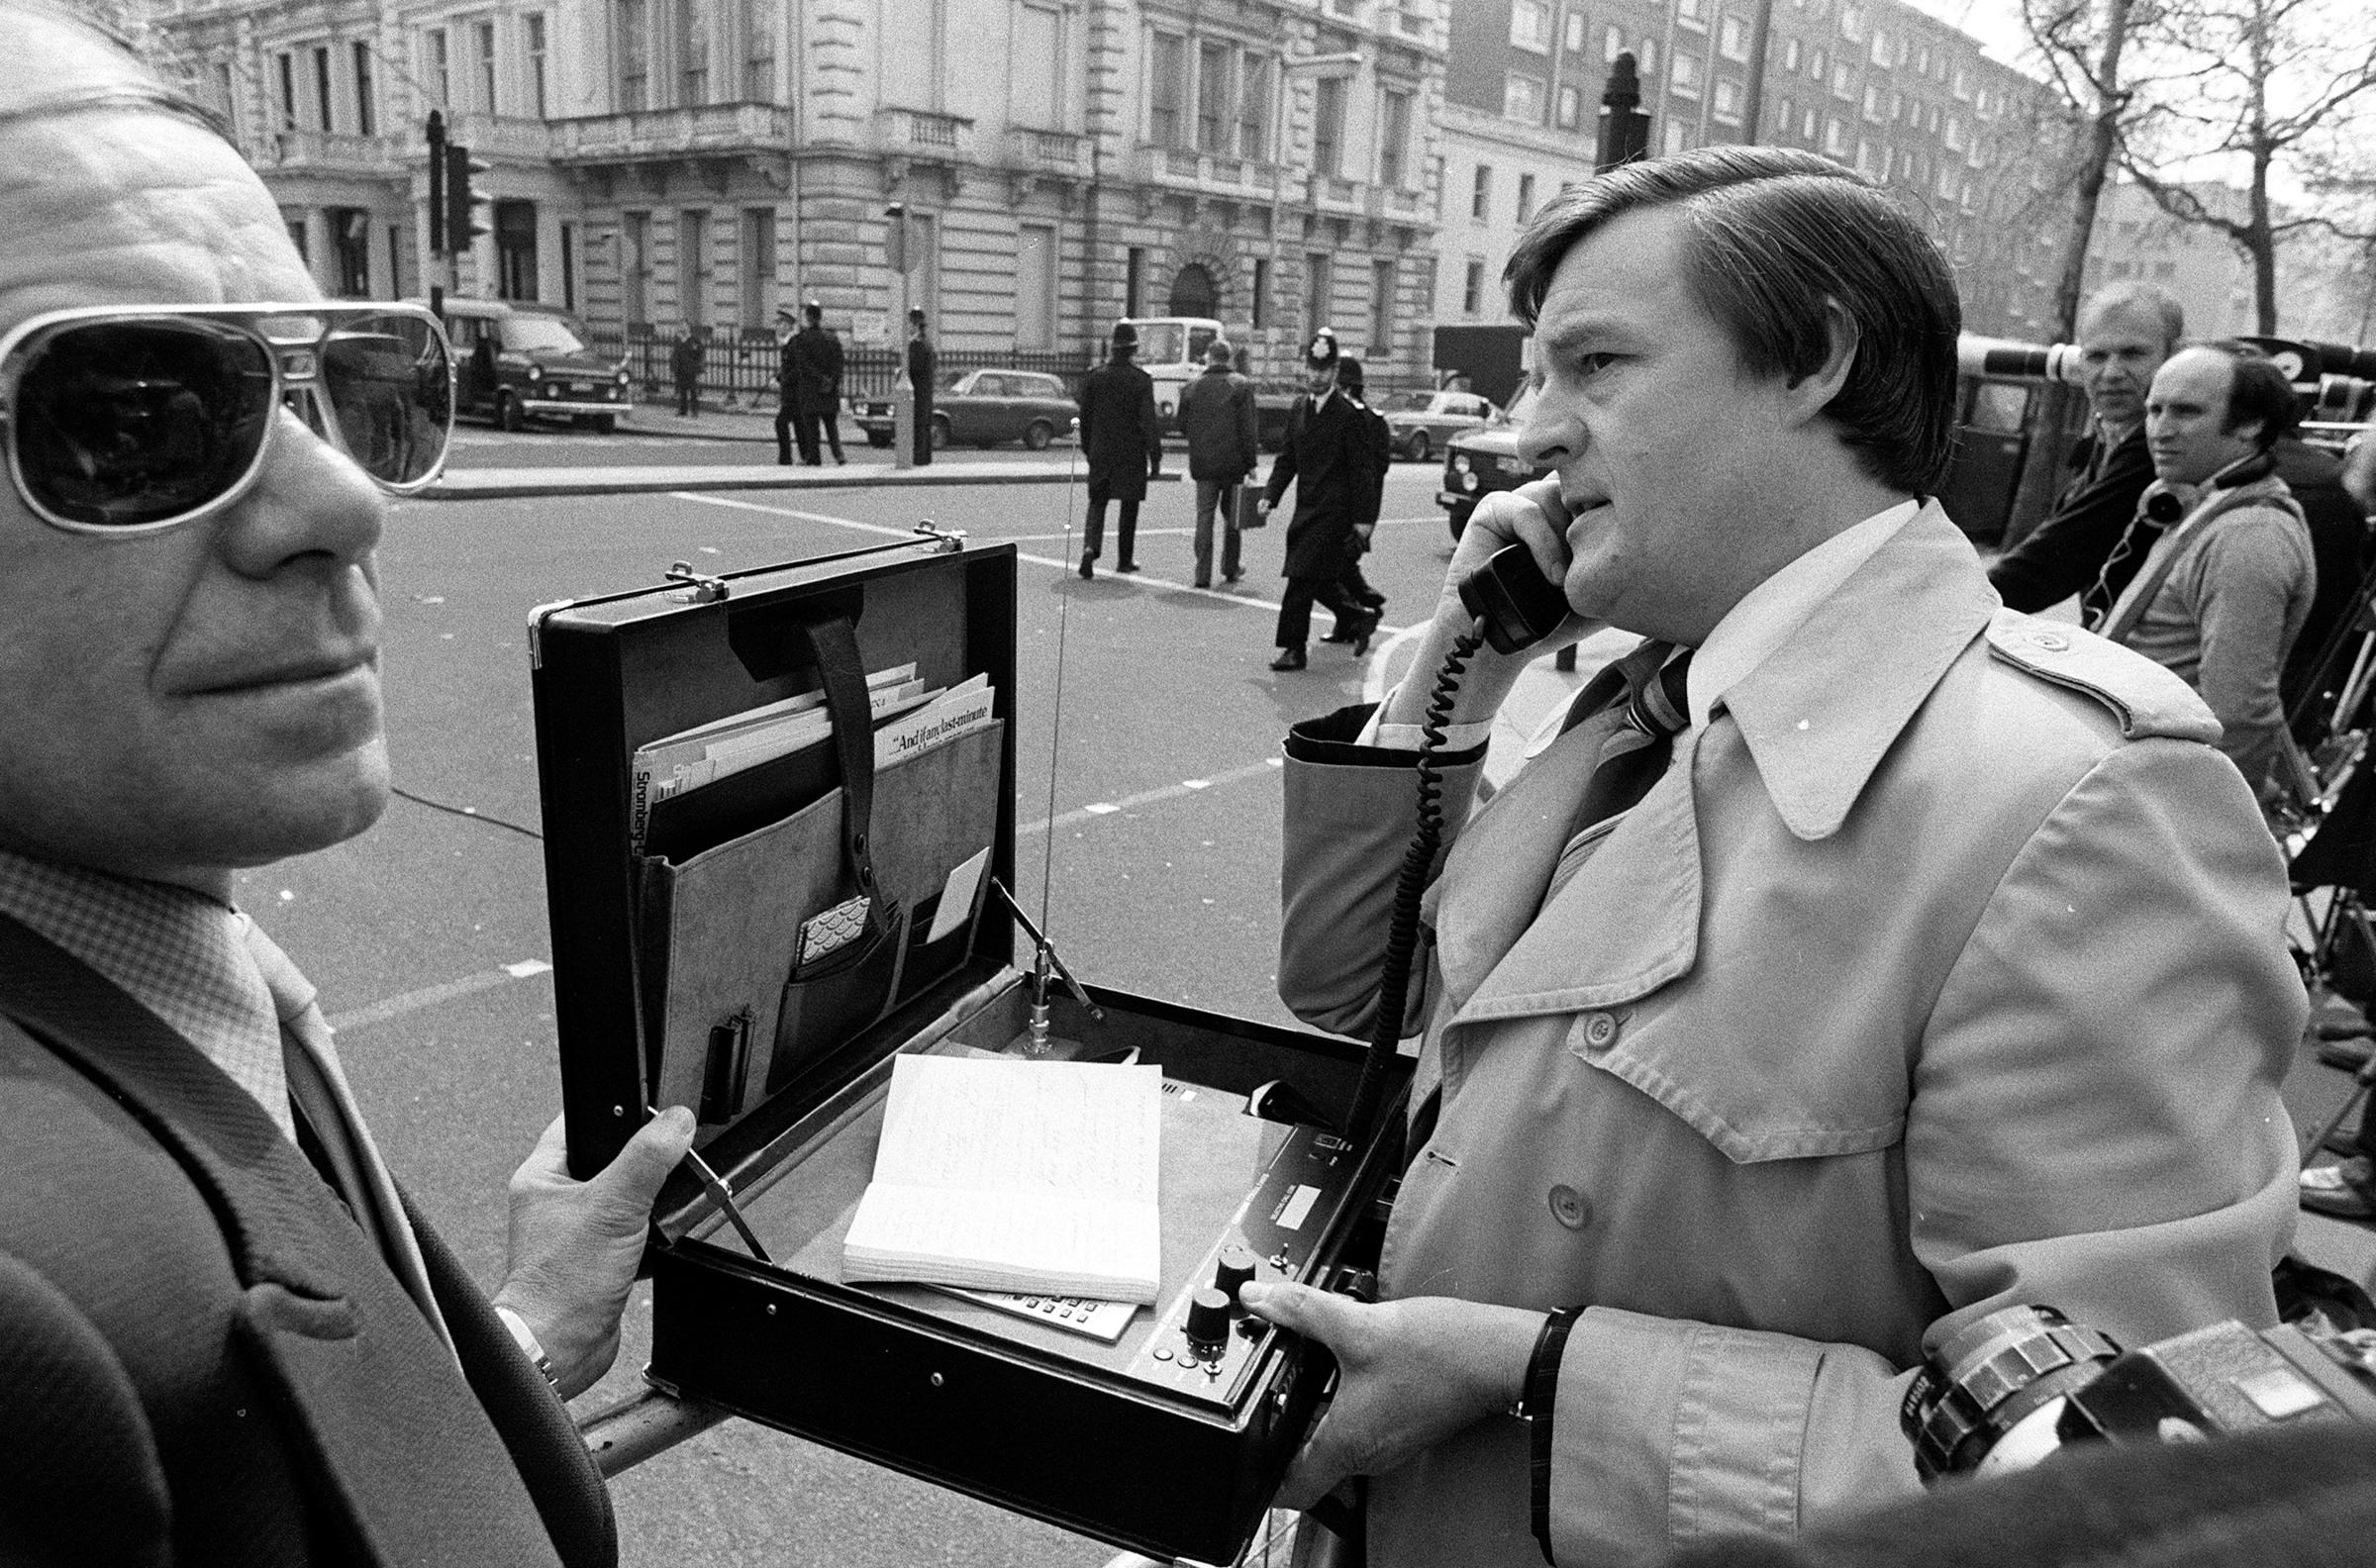 An early mobile phone during the Iranian Embassy siege at Princes Gate in South Kensington, London.